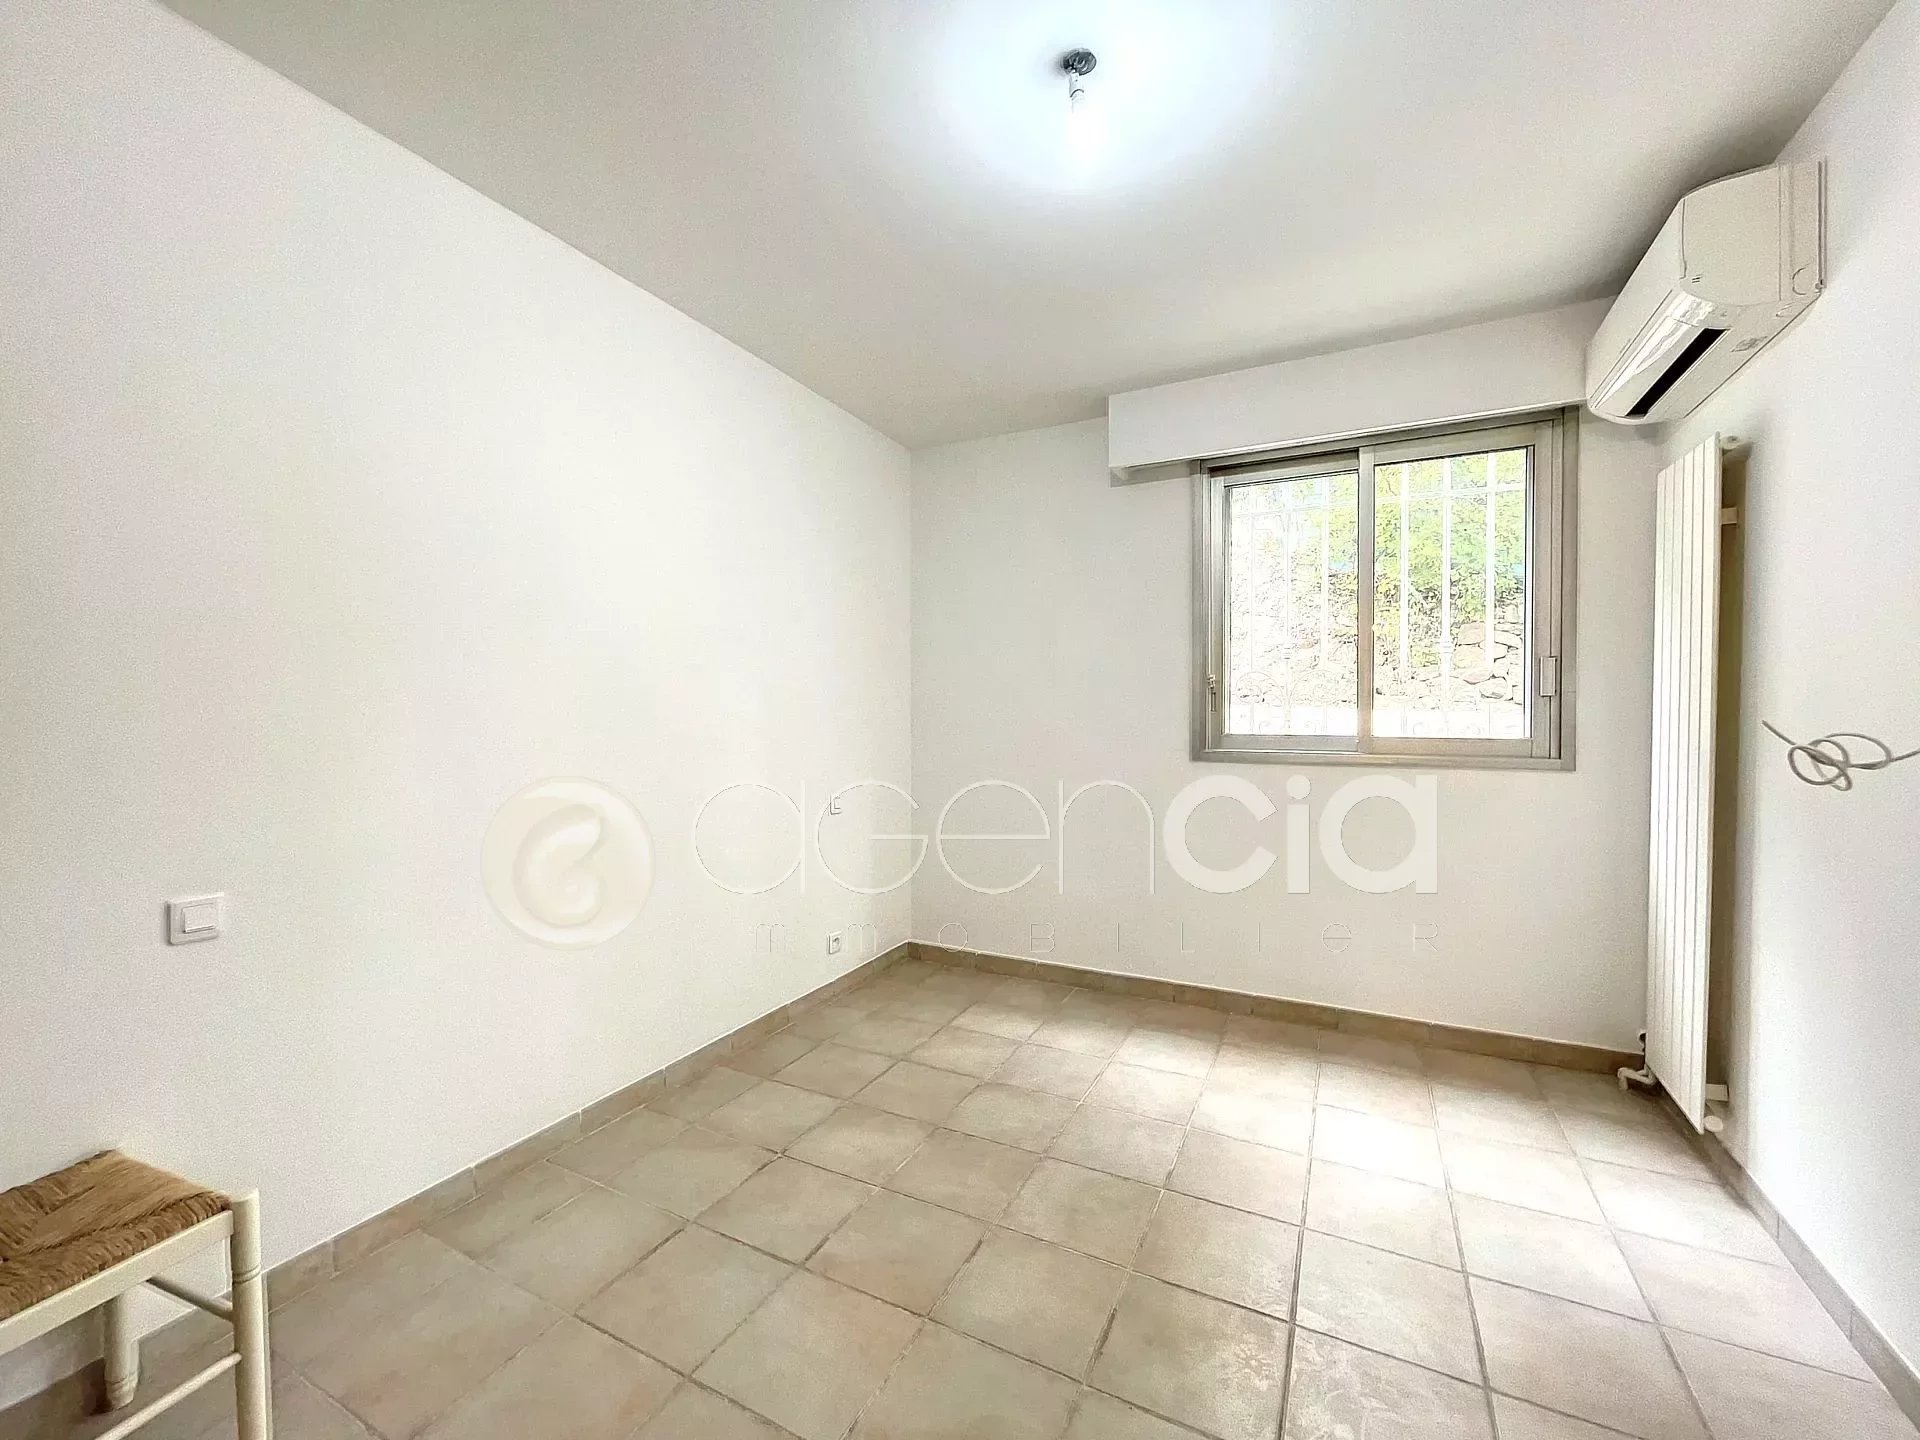 Renovated 3-room apartment with terrace, garage, and cellar.